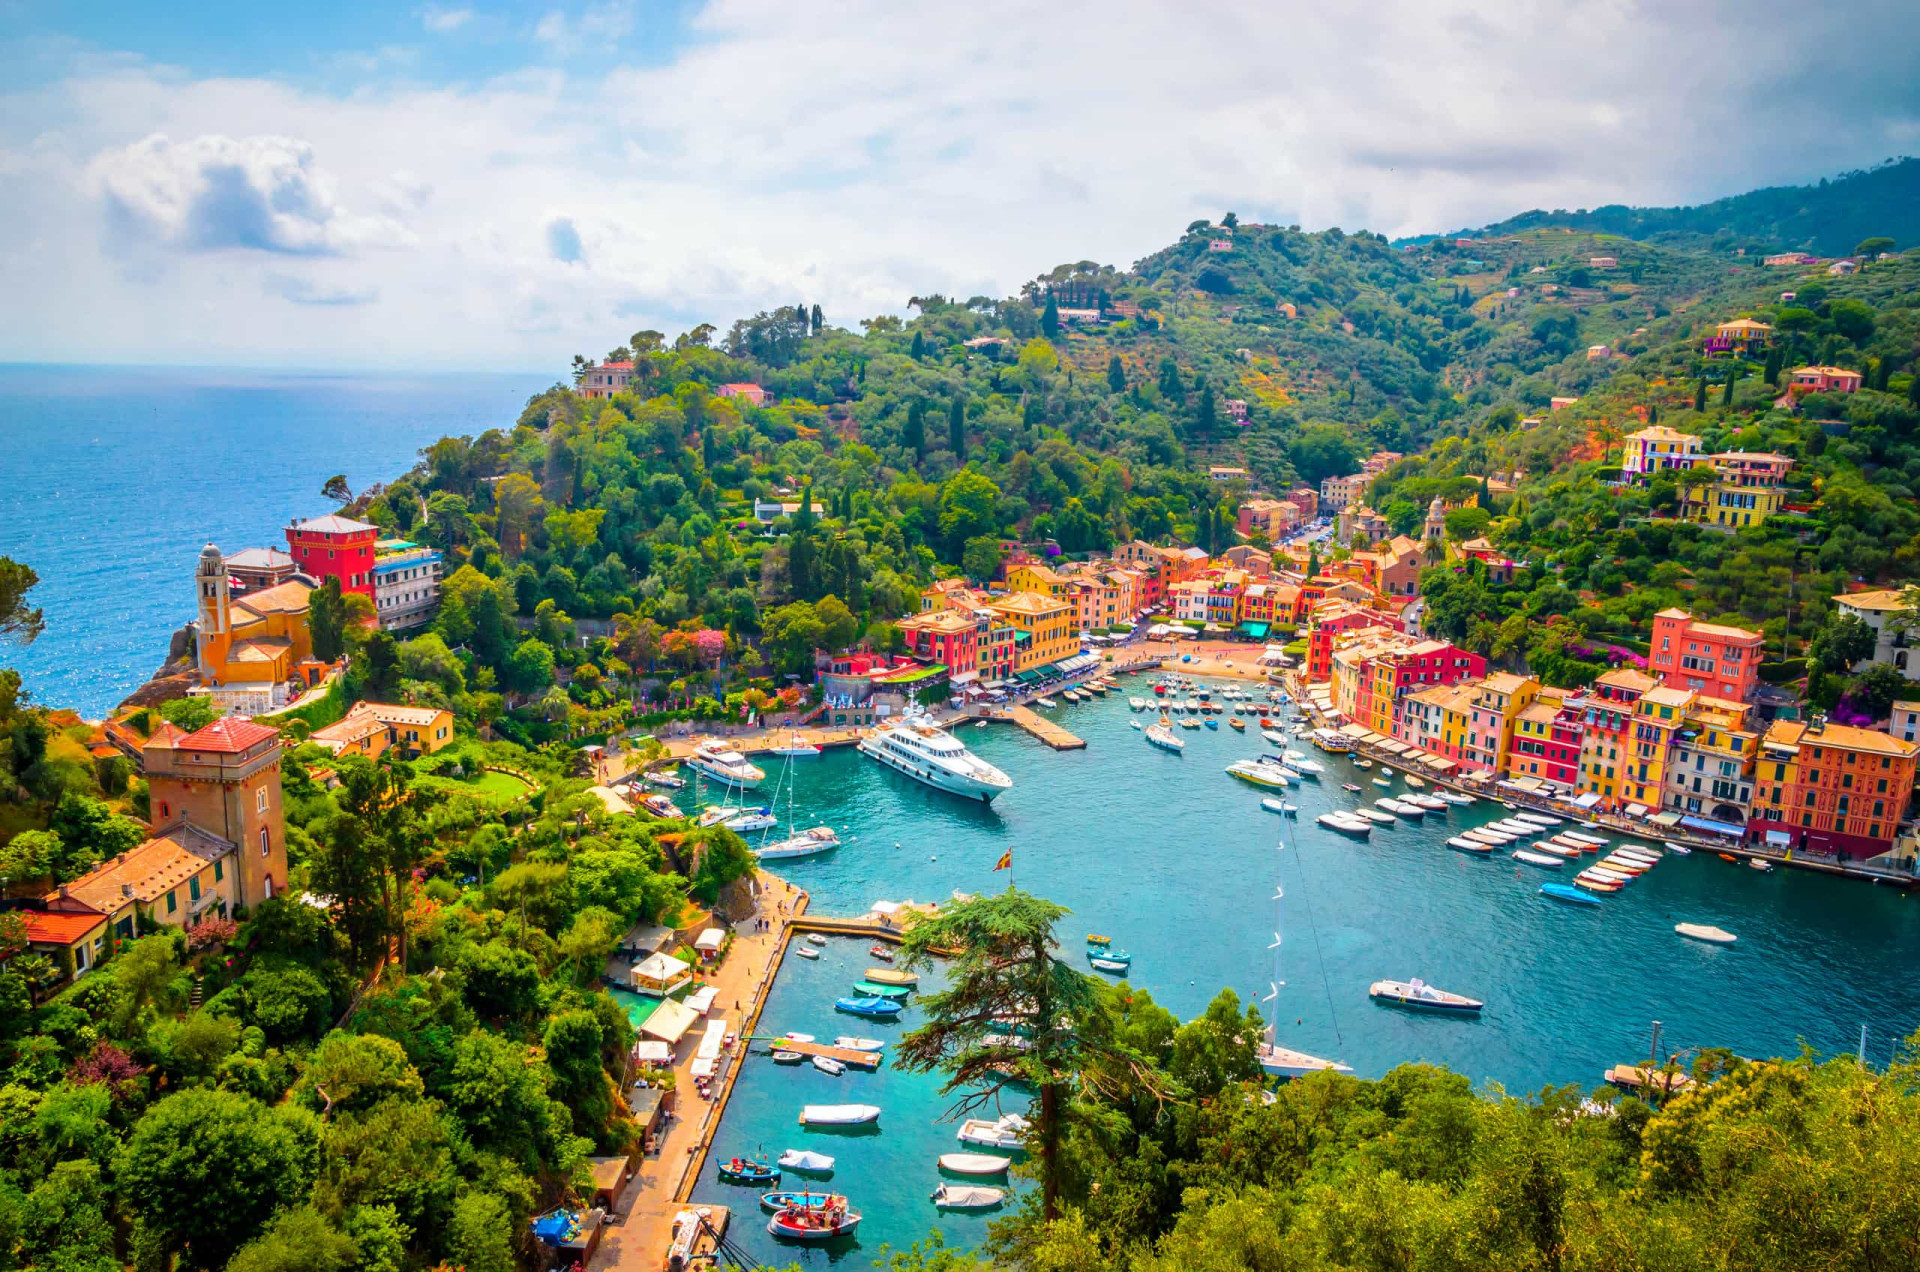 <p>One of the towns that distinguish the Italian Riviera, Portofino is clustered around its small harbor, which serves as a picturesque gateway to the Ligurian Sea.</p>